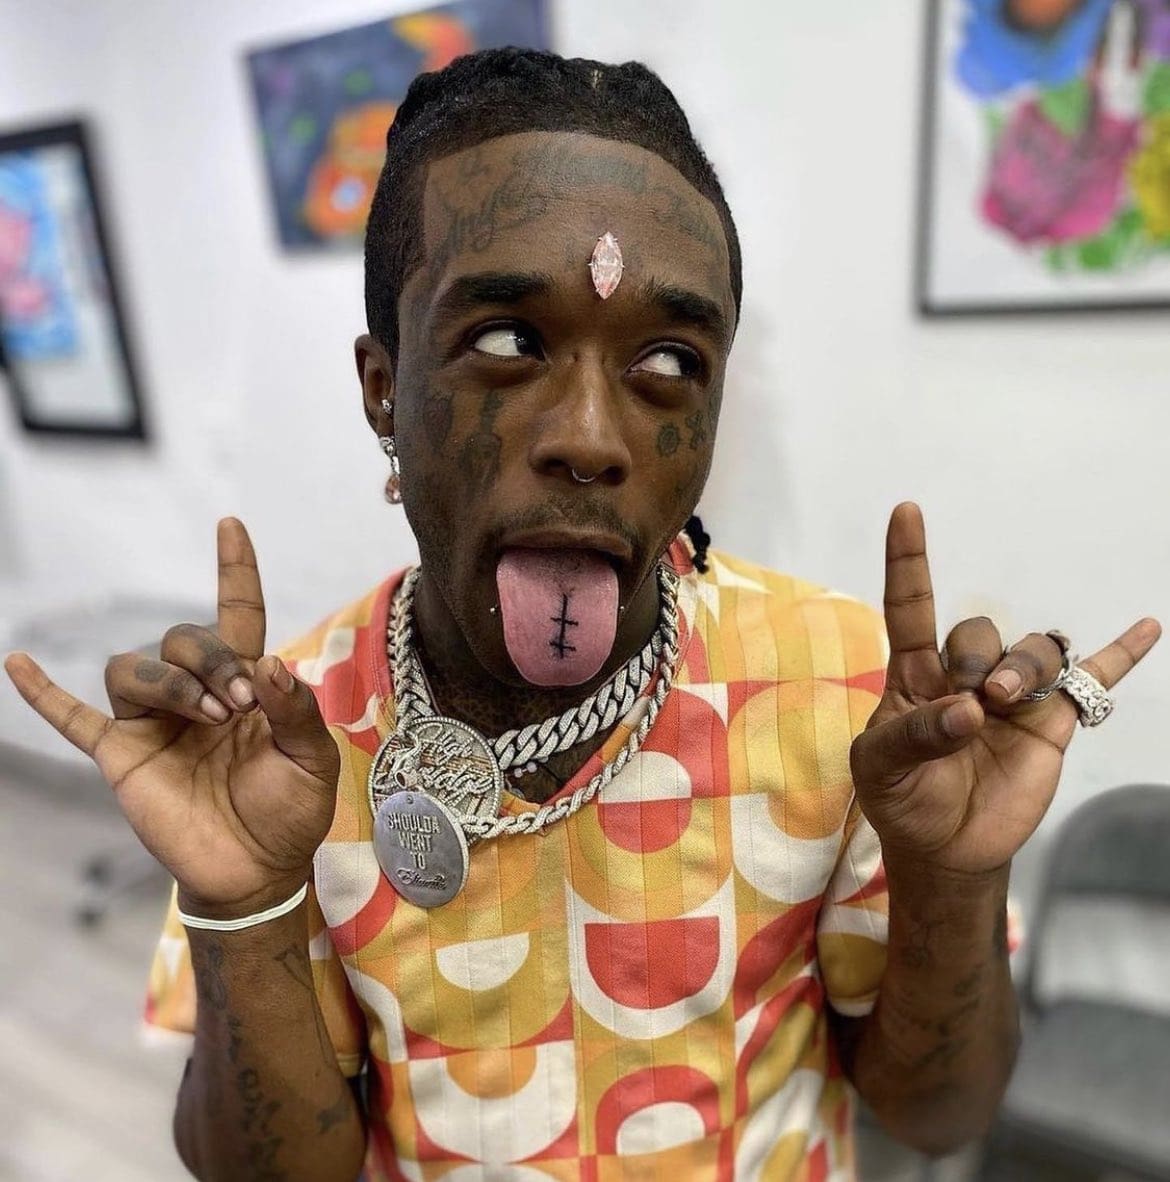 ”lil-uzi-was-robbed-by-fans-check-out-the-latest-details-about-what-happened”